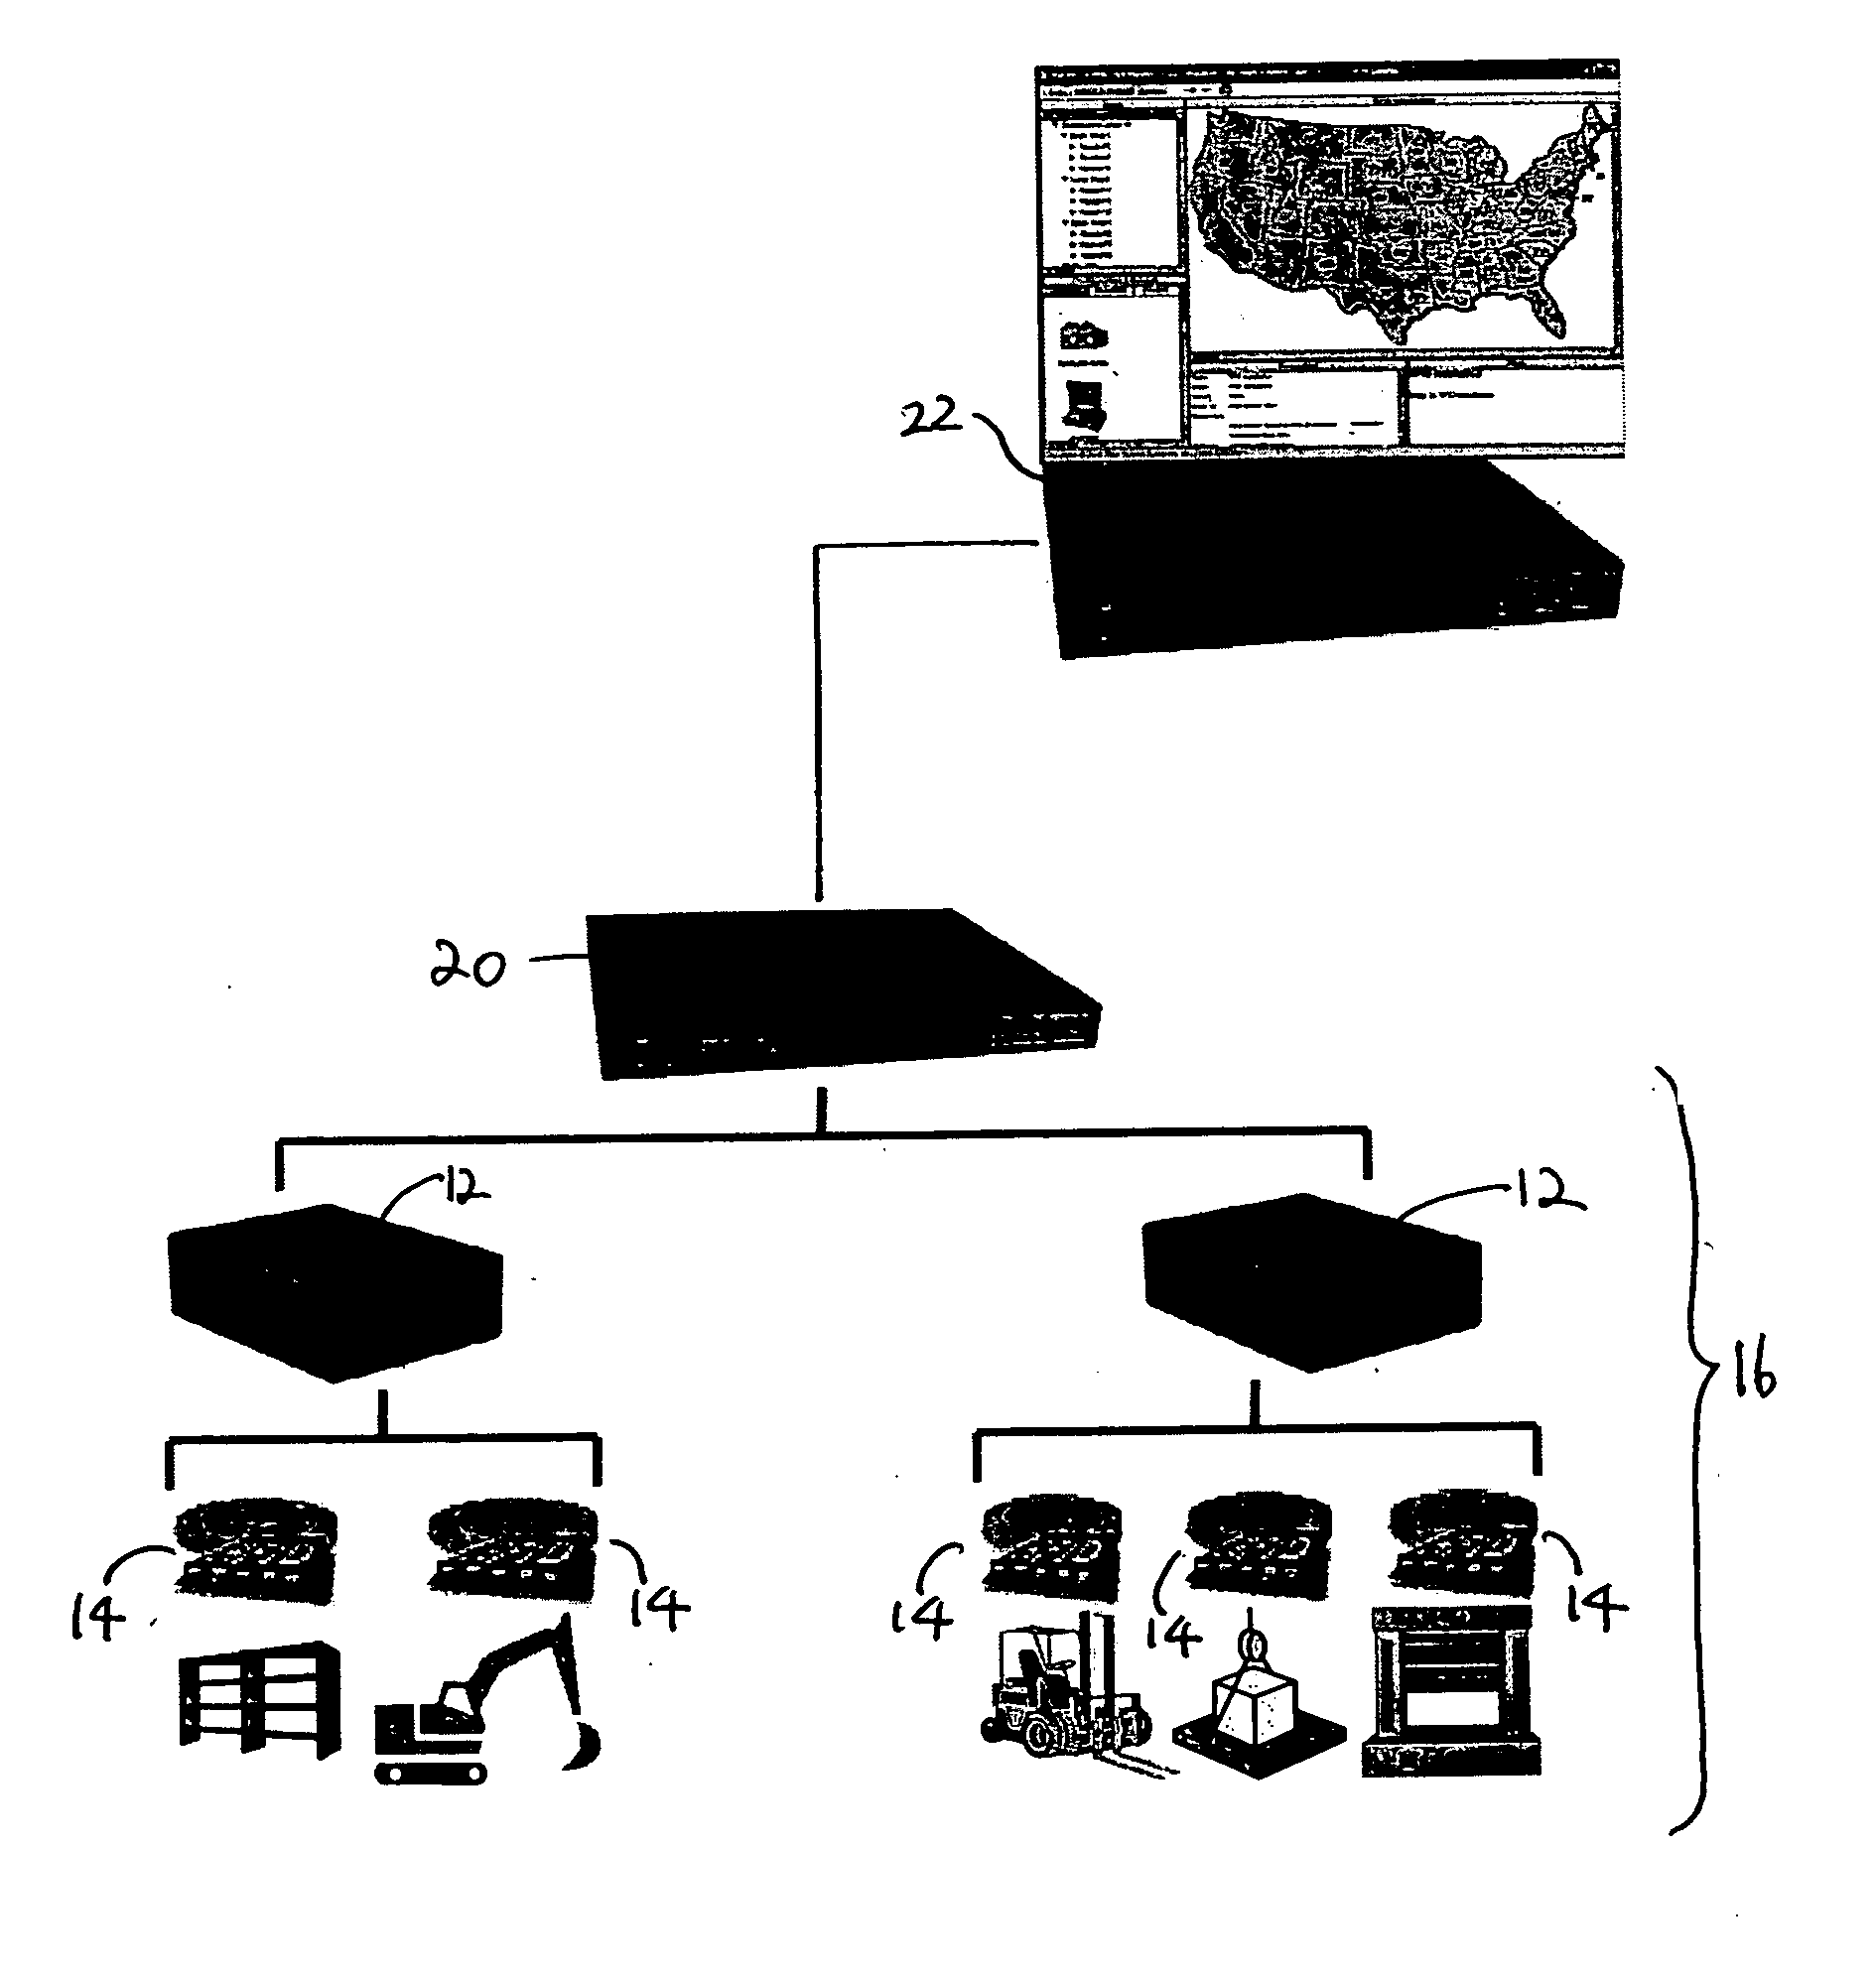 Radio frequency identification (RFID) network system and method